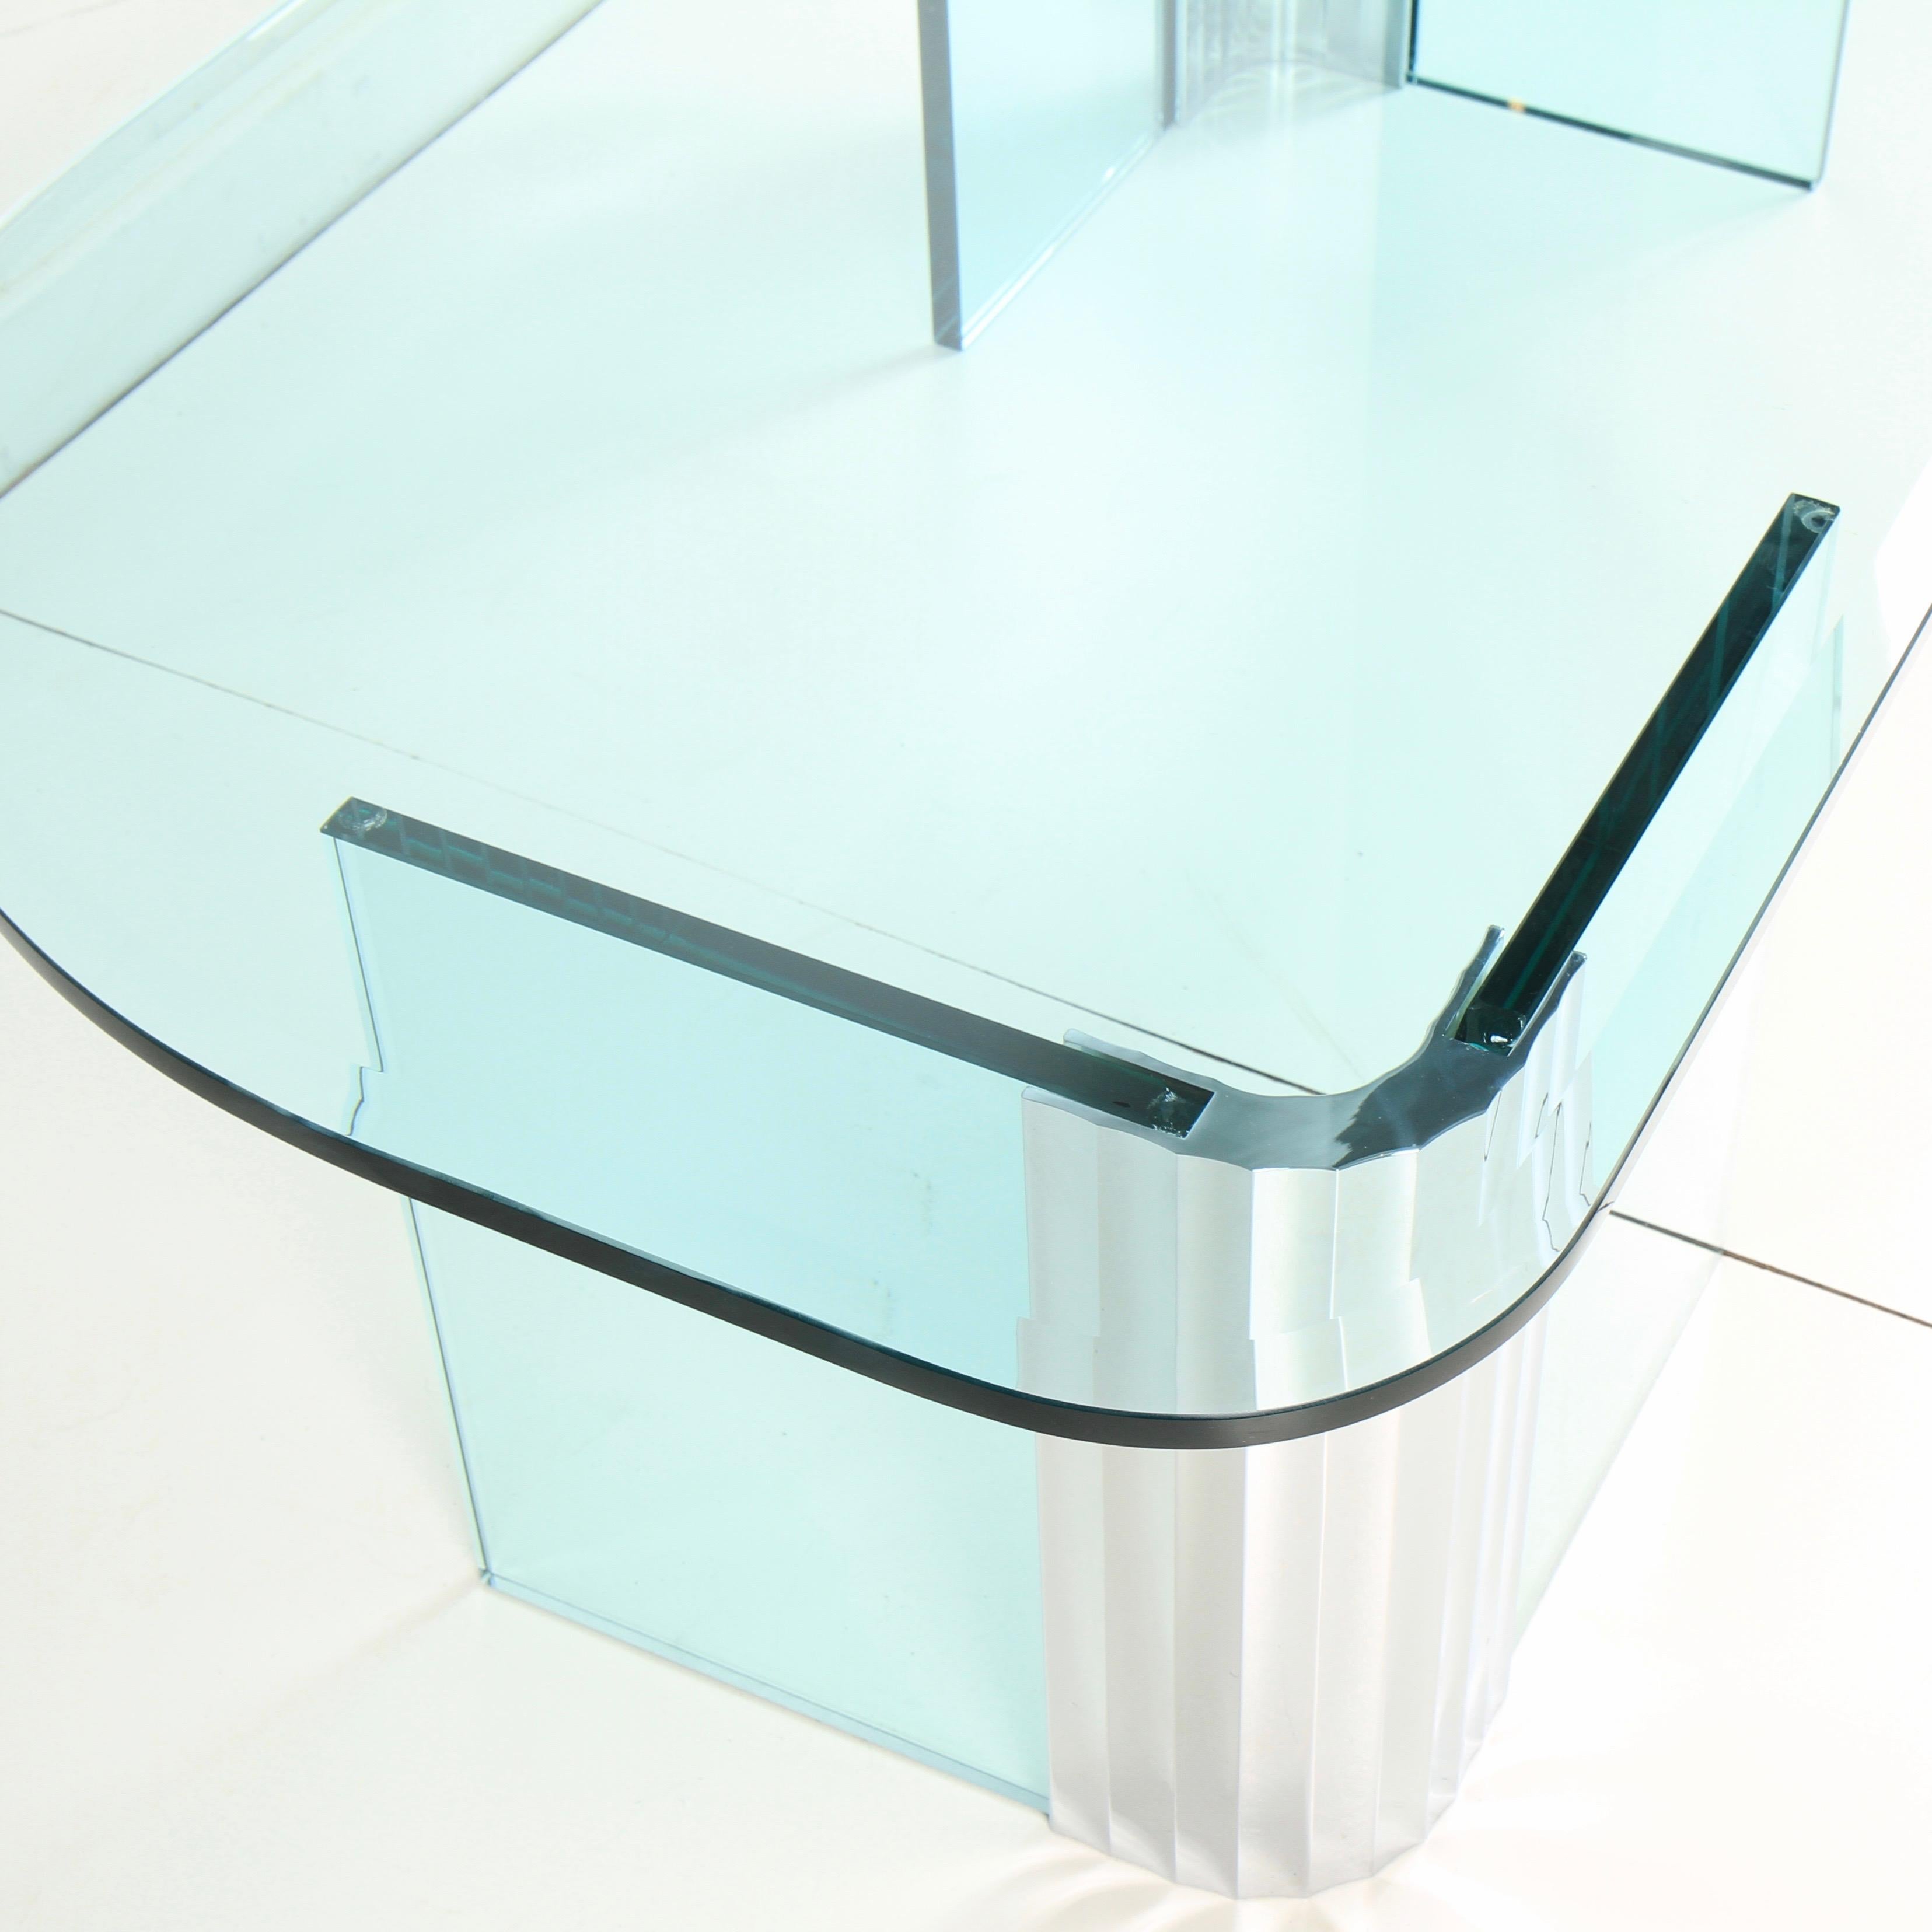 20th Century Leon Rosen Scalloped Chrome and Glass Coffee Table for Pace Collection